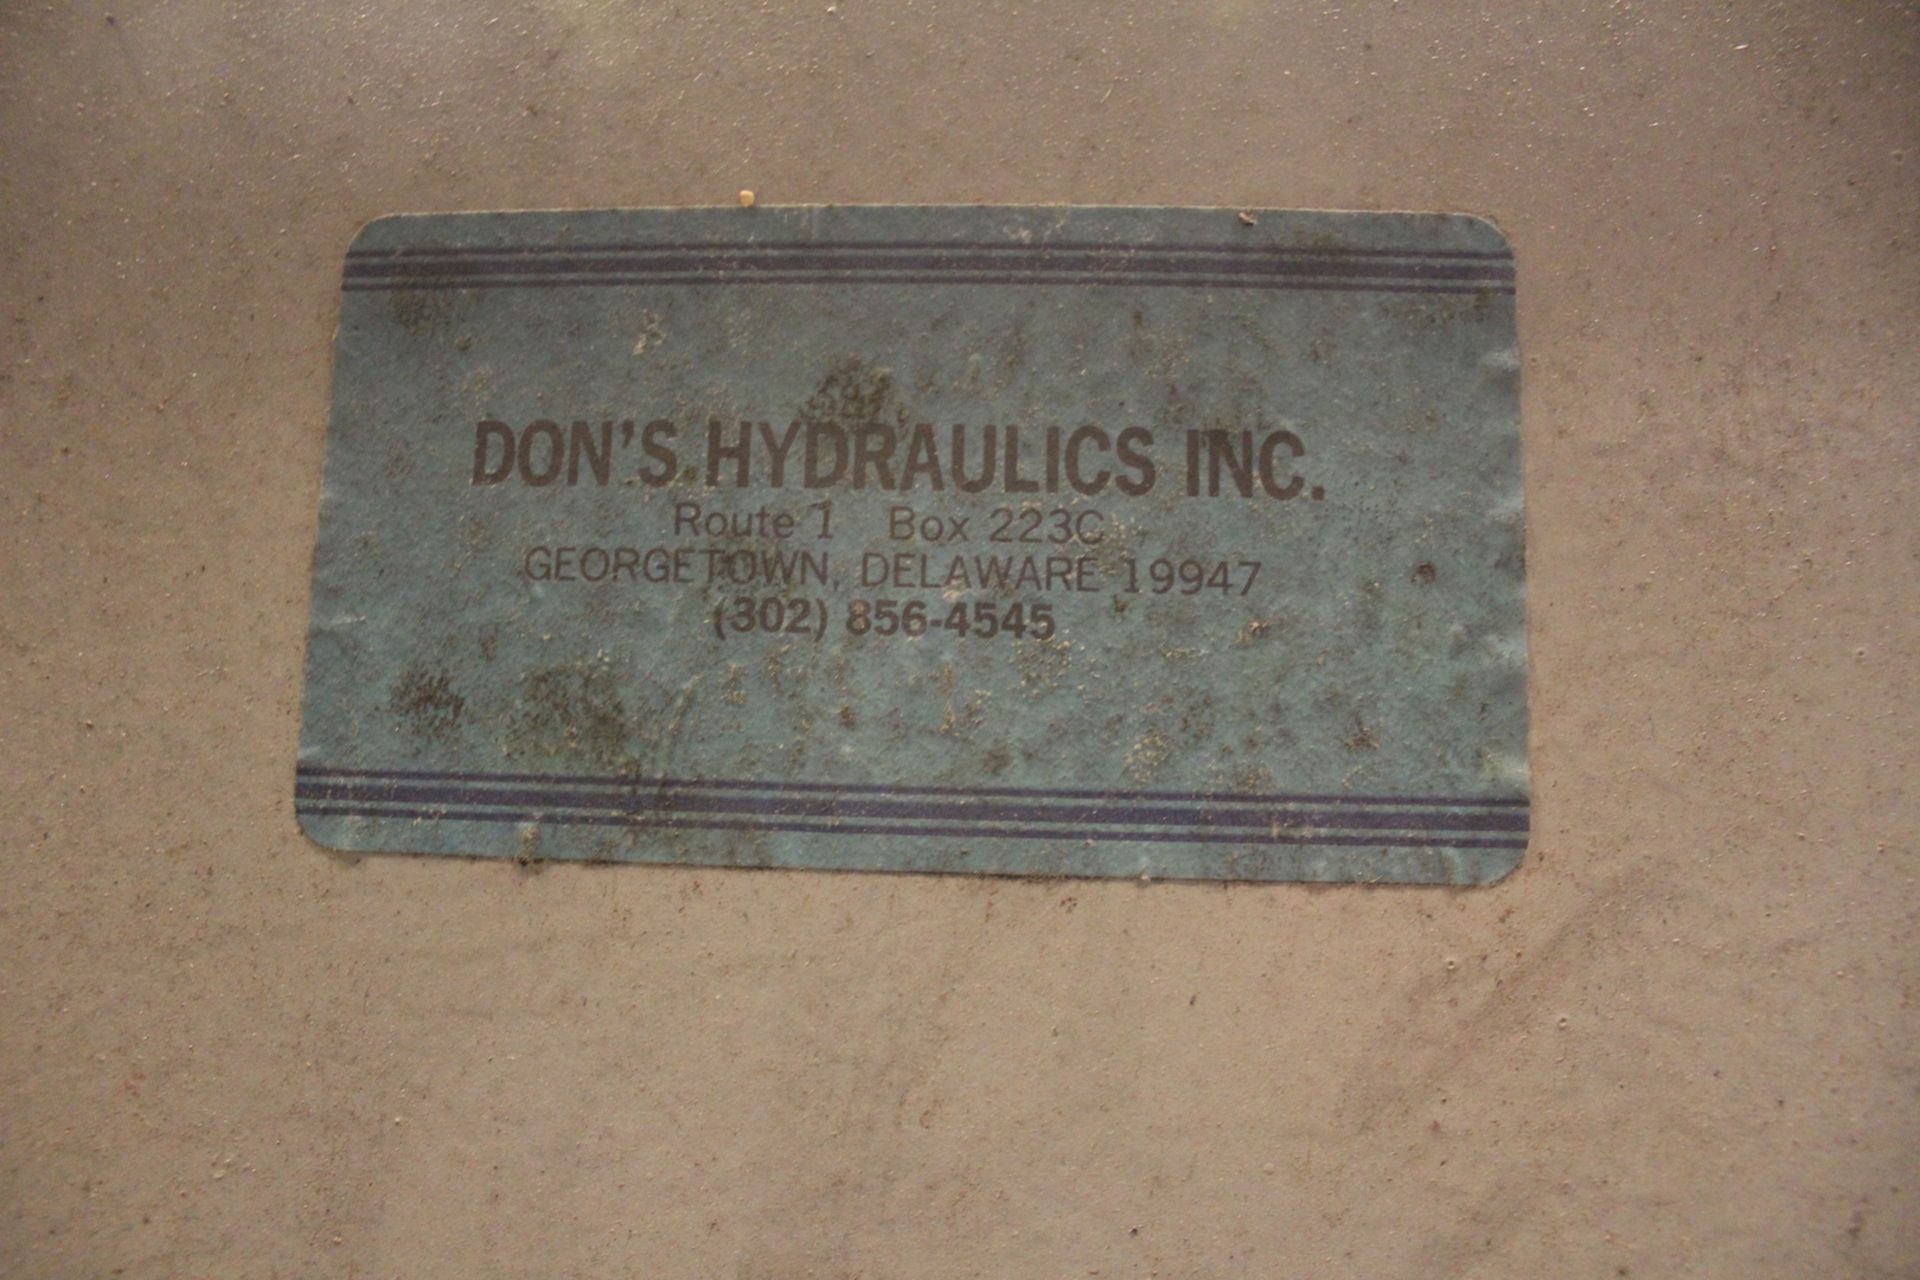 Don's Hydraulics Hydraulic Powerpak, Located in: Cartersville, GA - Image 6 of 8